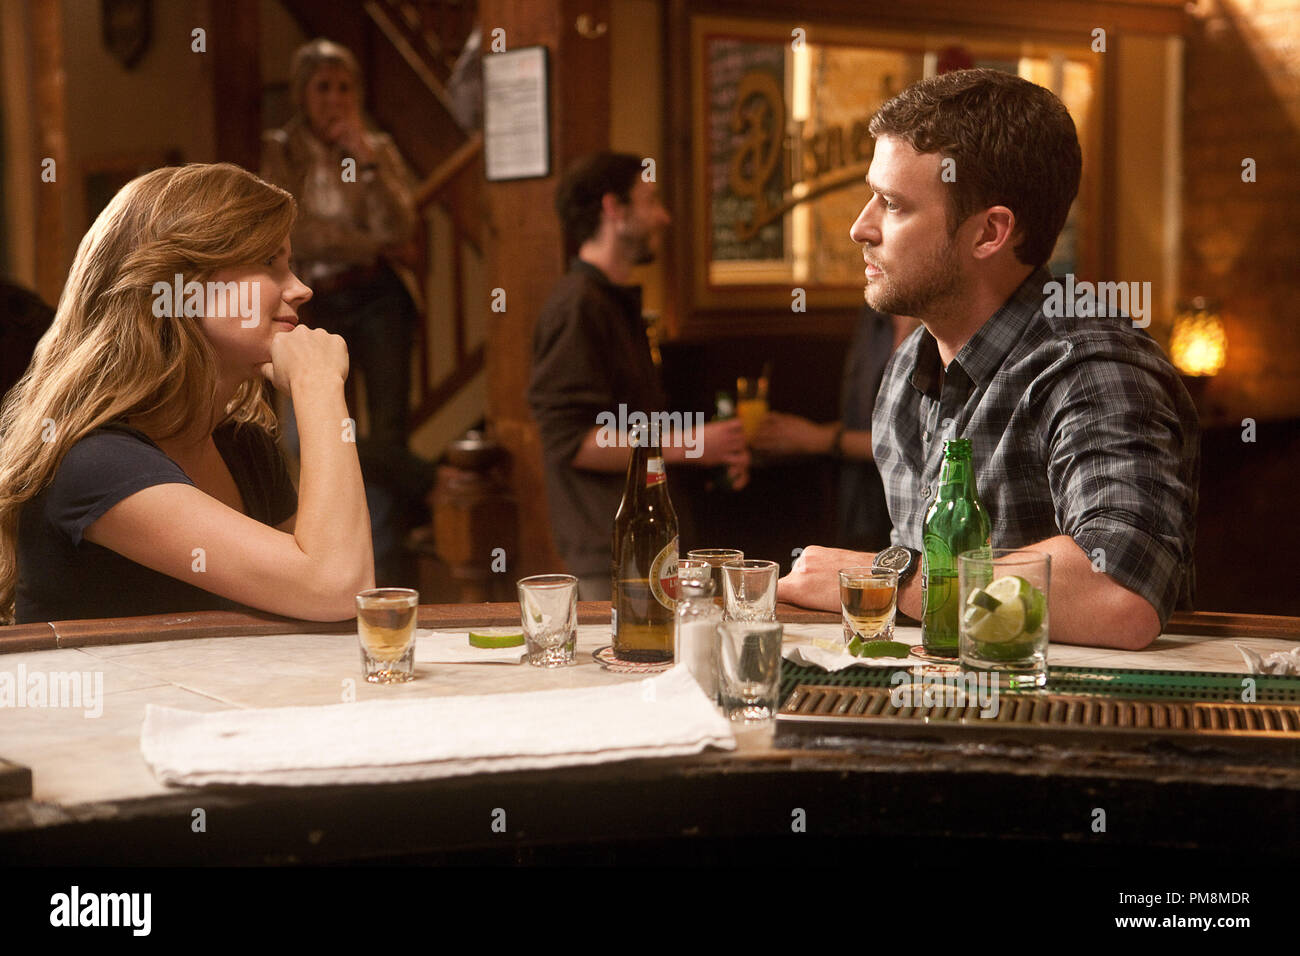 (L–r) AMY ADAMS as Mickey and JUSTIN TIMBERLAKE as Johnny in Warner Bros. Pictures’ drama “TROUBLE WITH THE CURVE,” a Warner Bros. Pictures release. Stock Photo